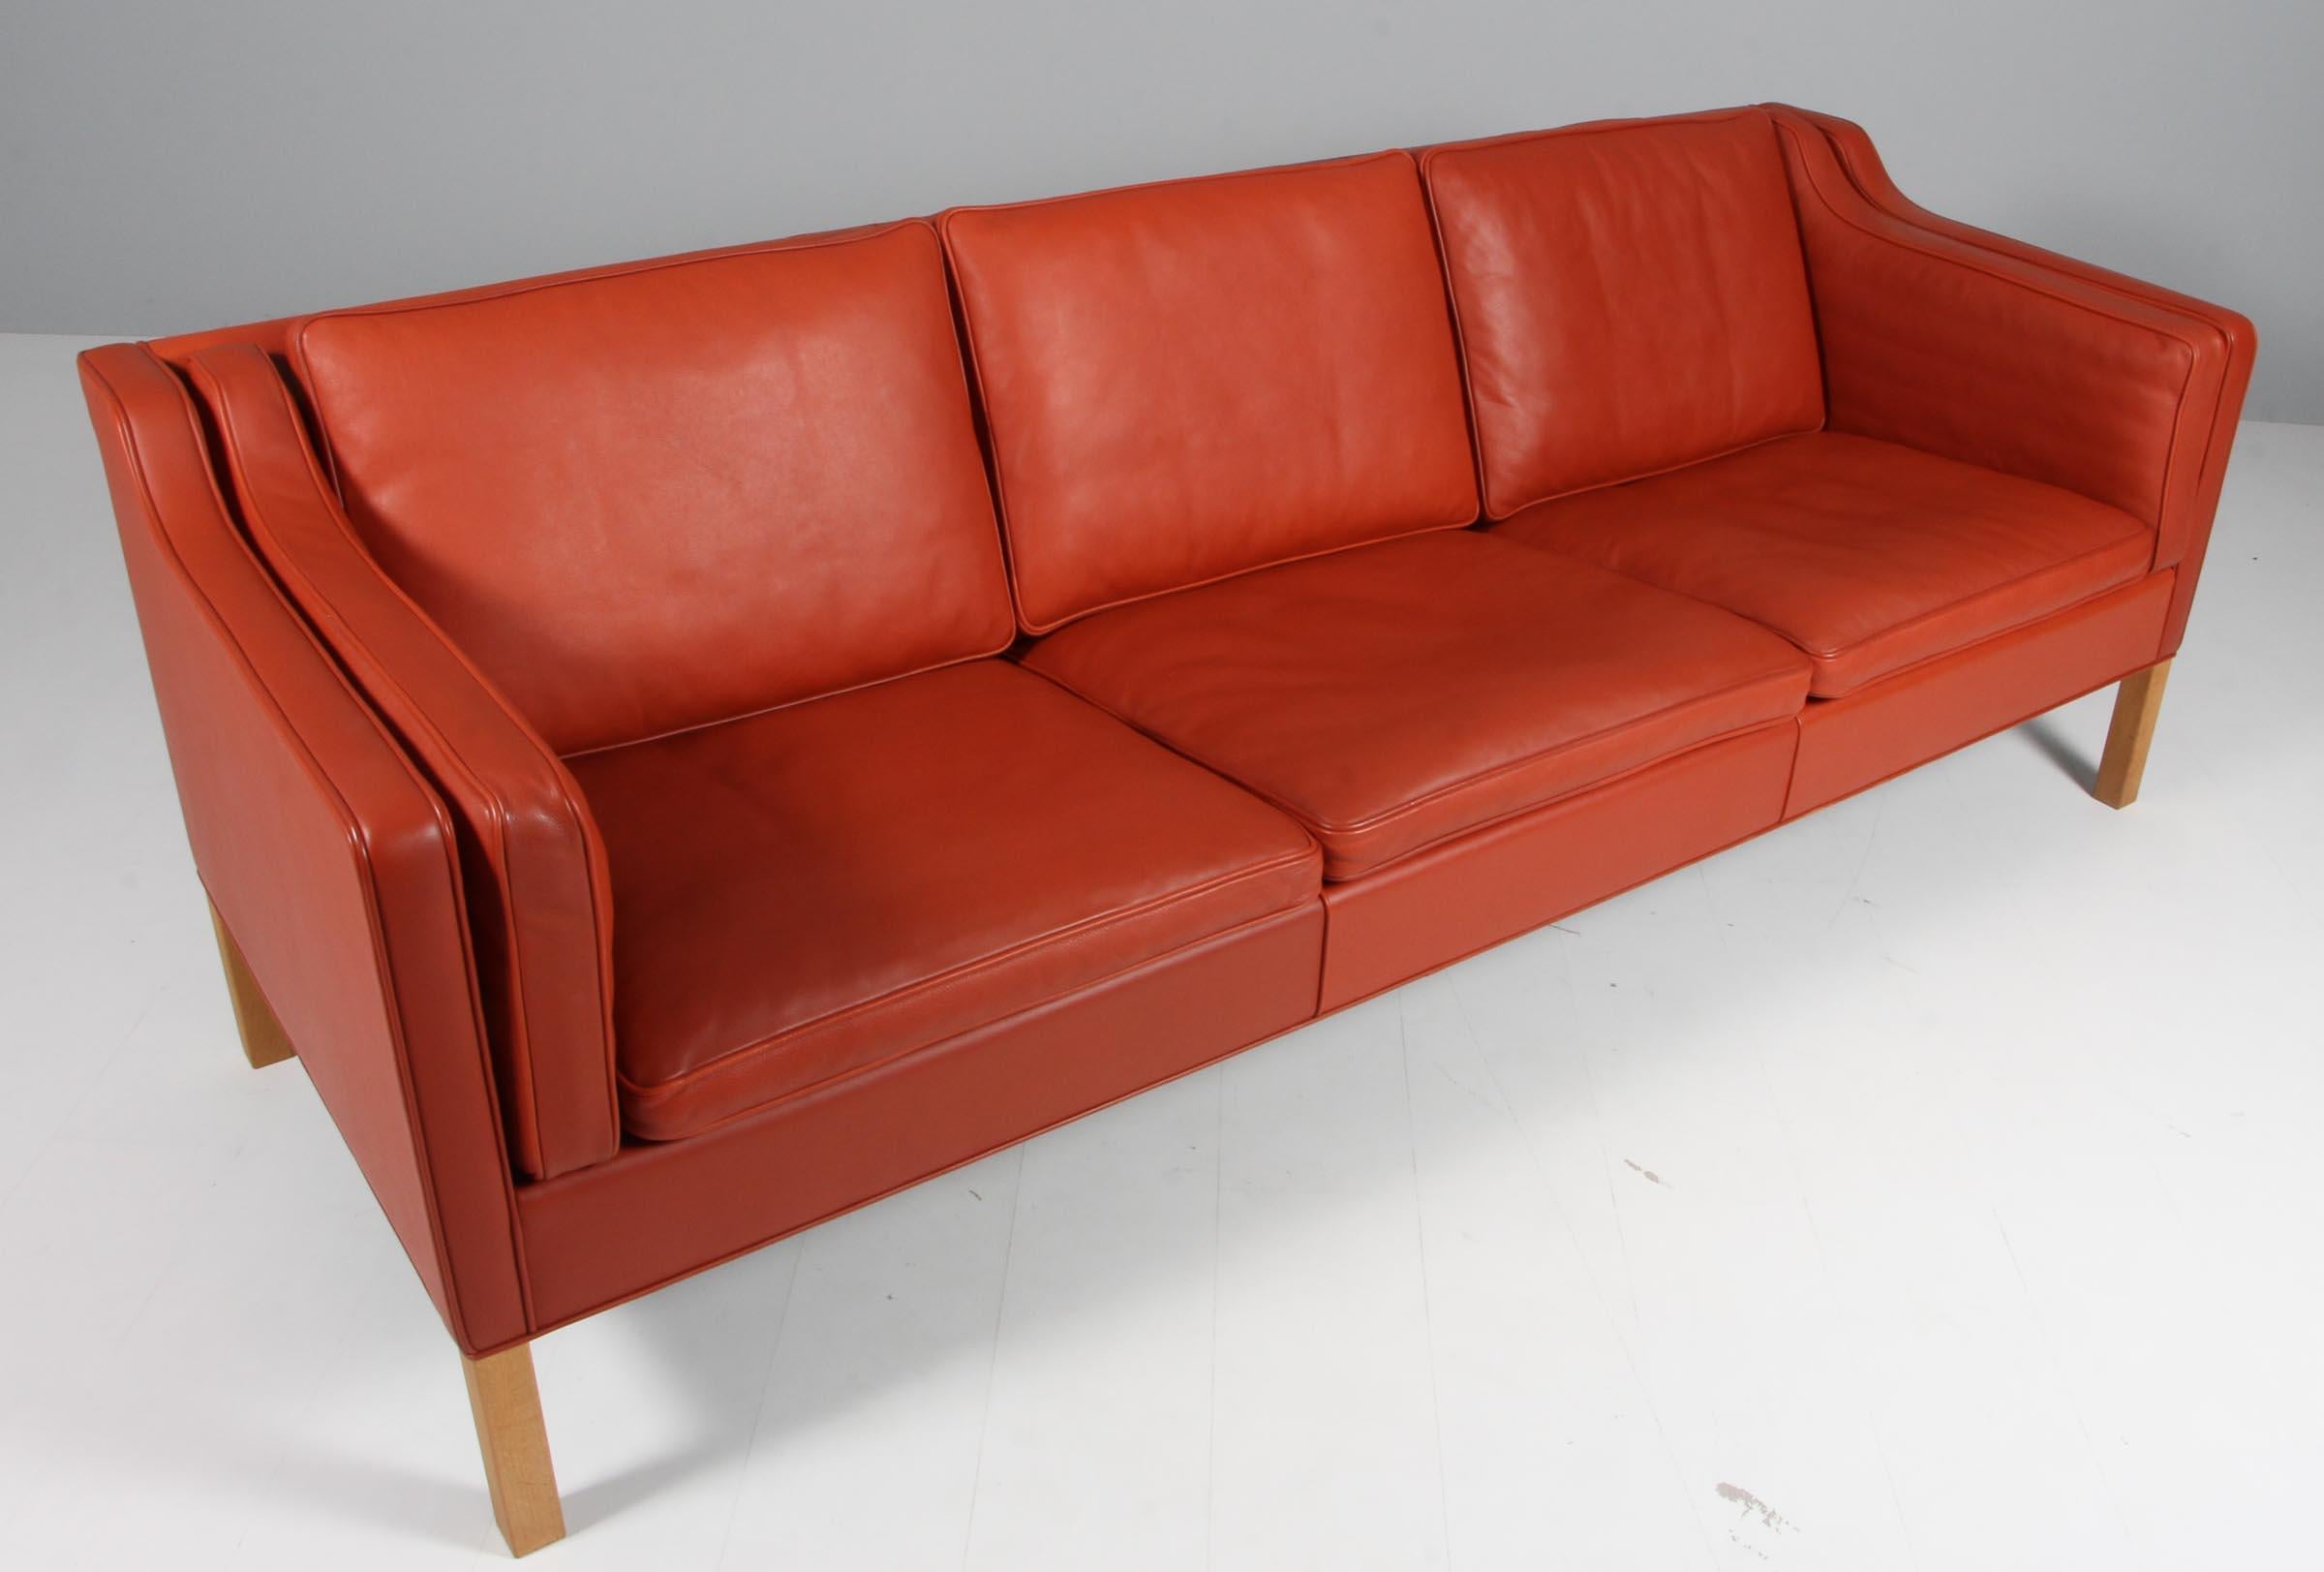 Børge Mogensen three-seat sofa with original cognac upholstery.

Legs of oak.

Model 2213, made by Fredericia Furniture.